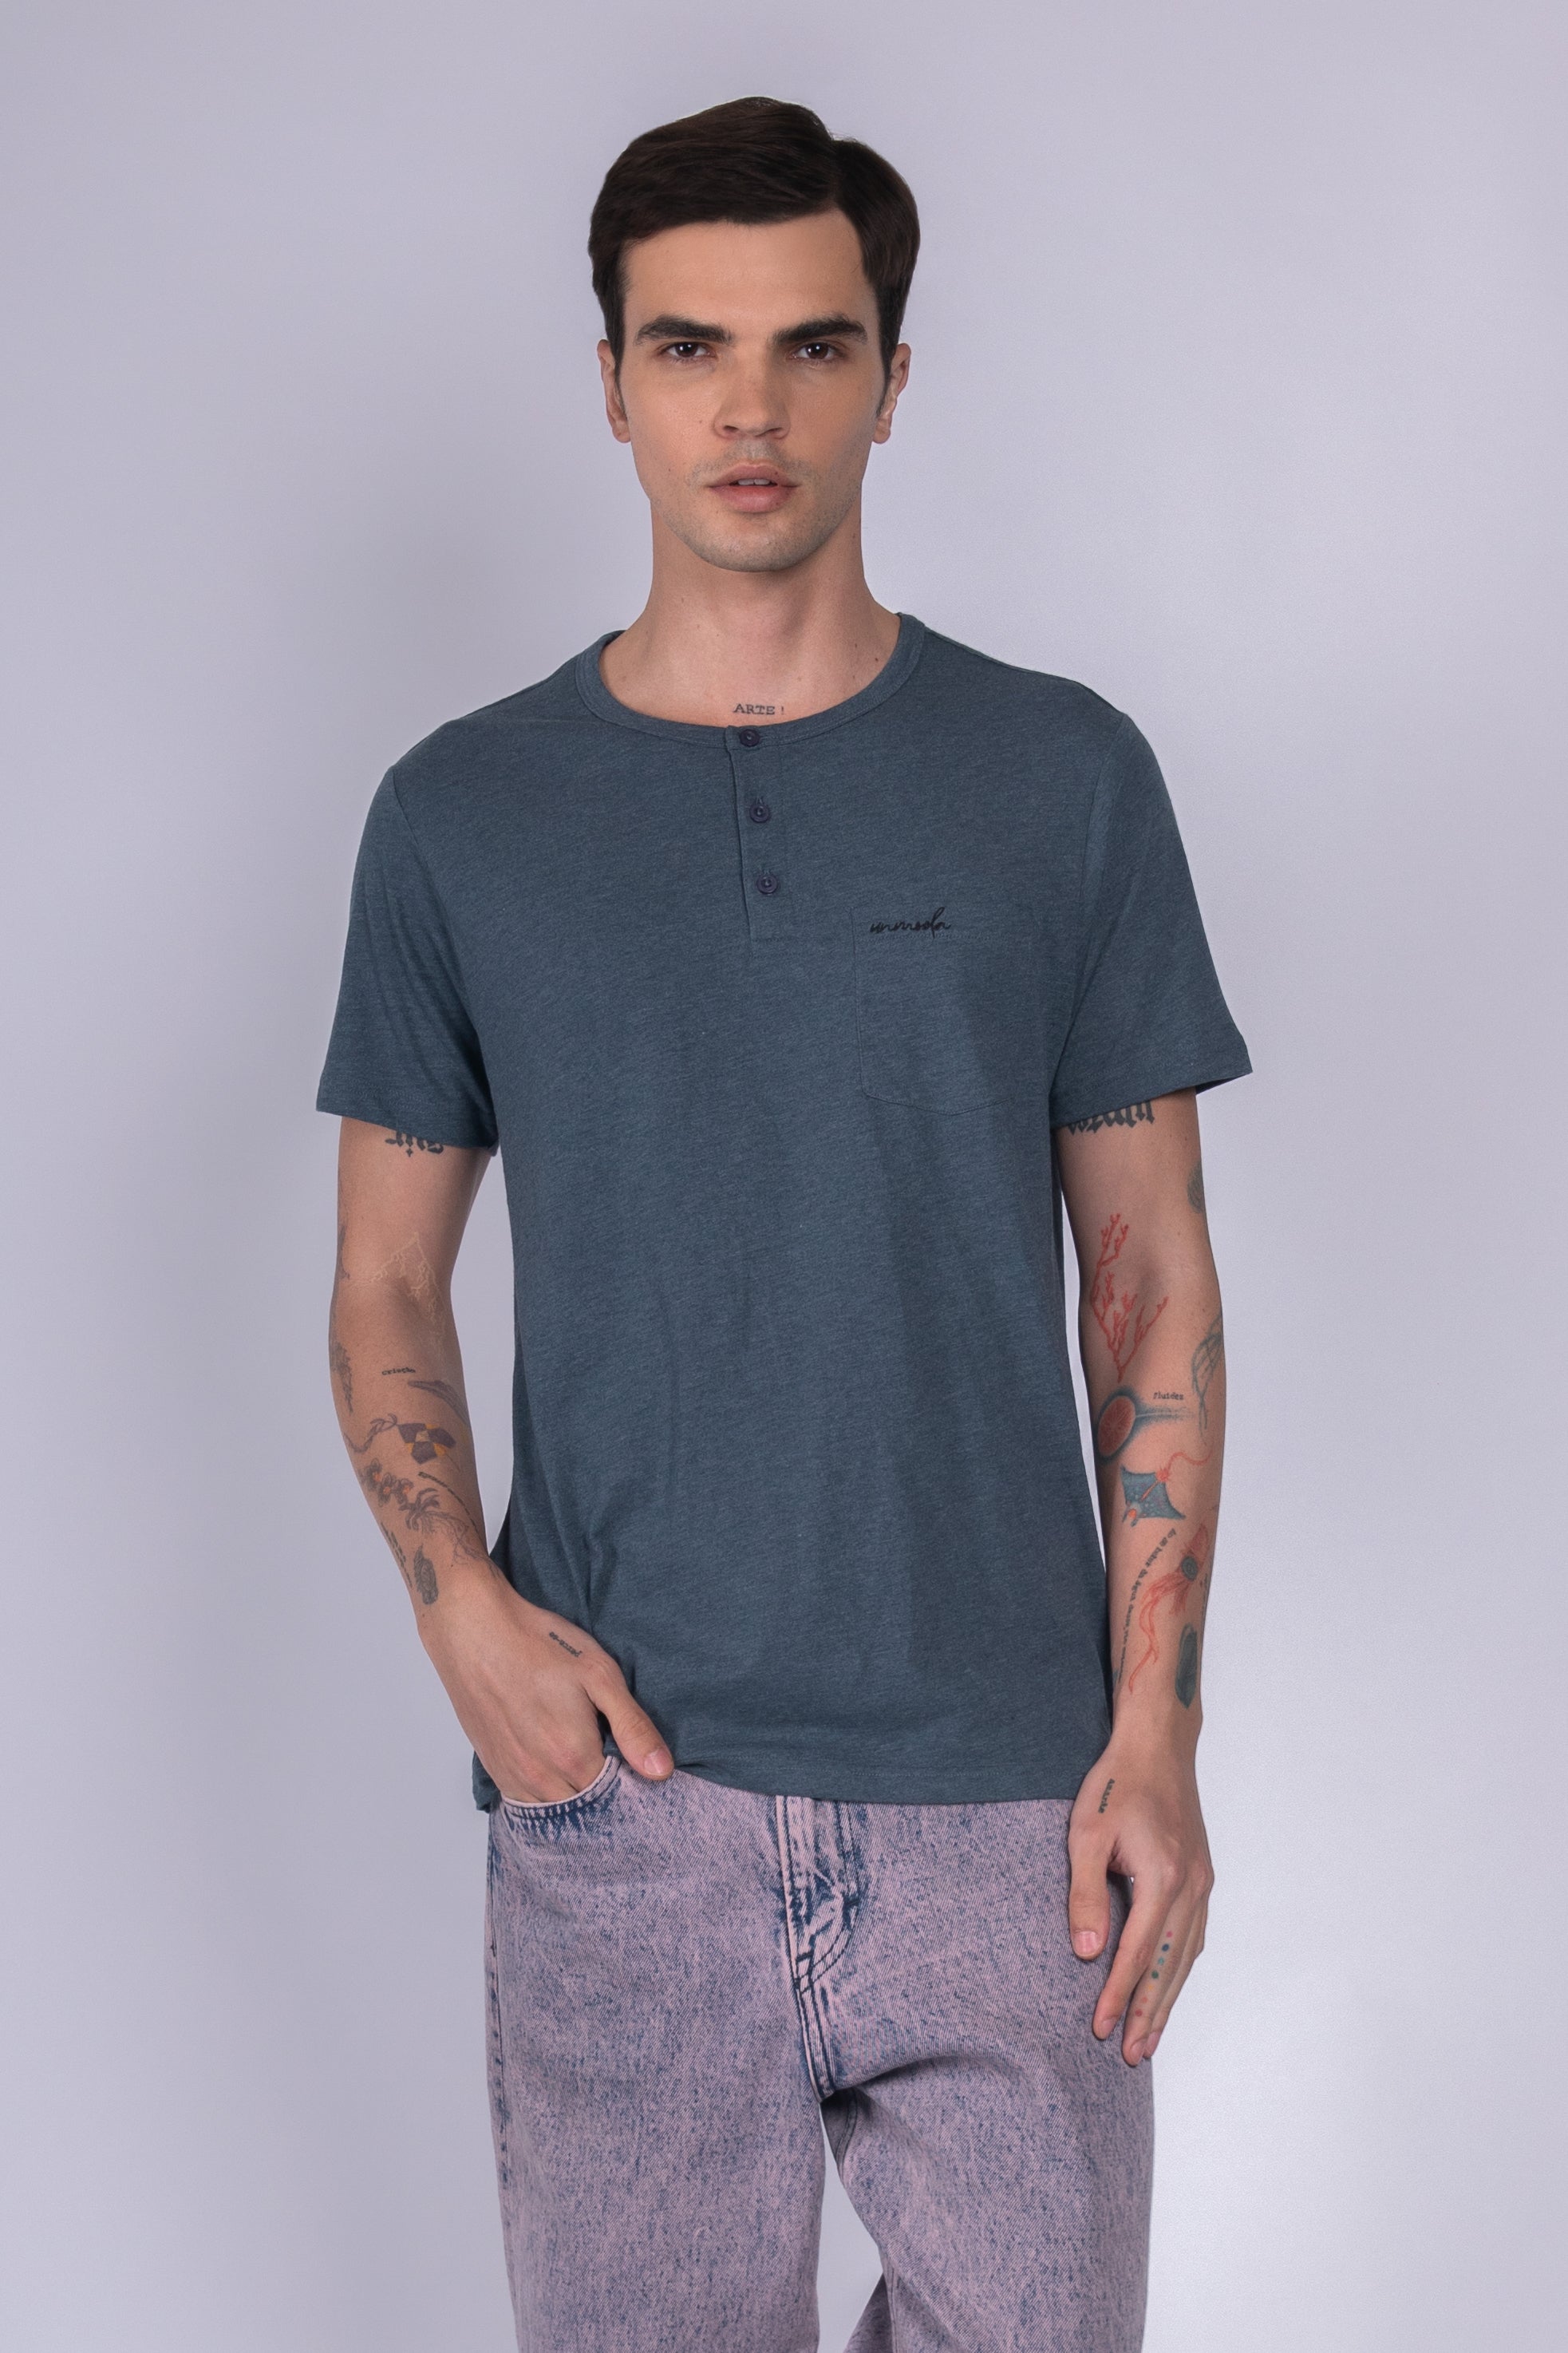 Essenly Organic Cotton Blended T-shirt